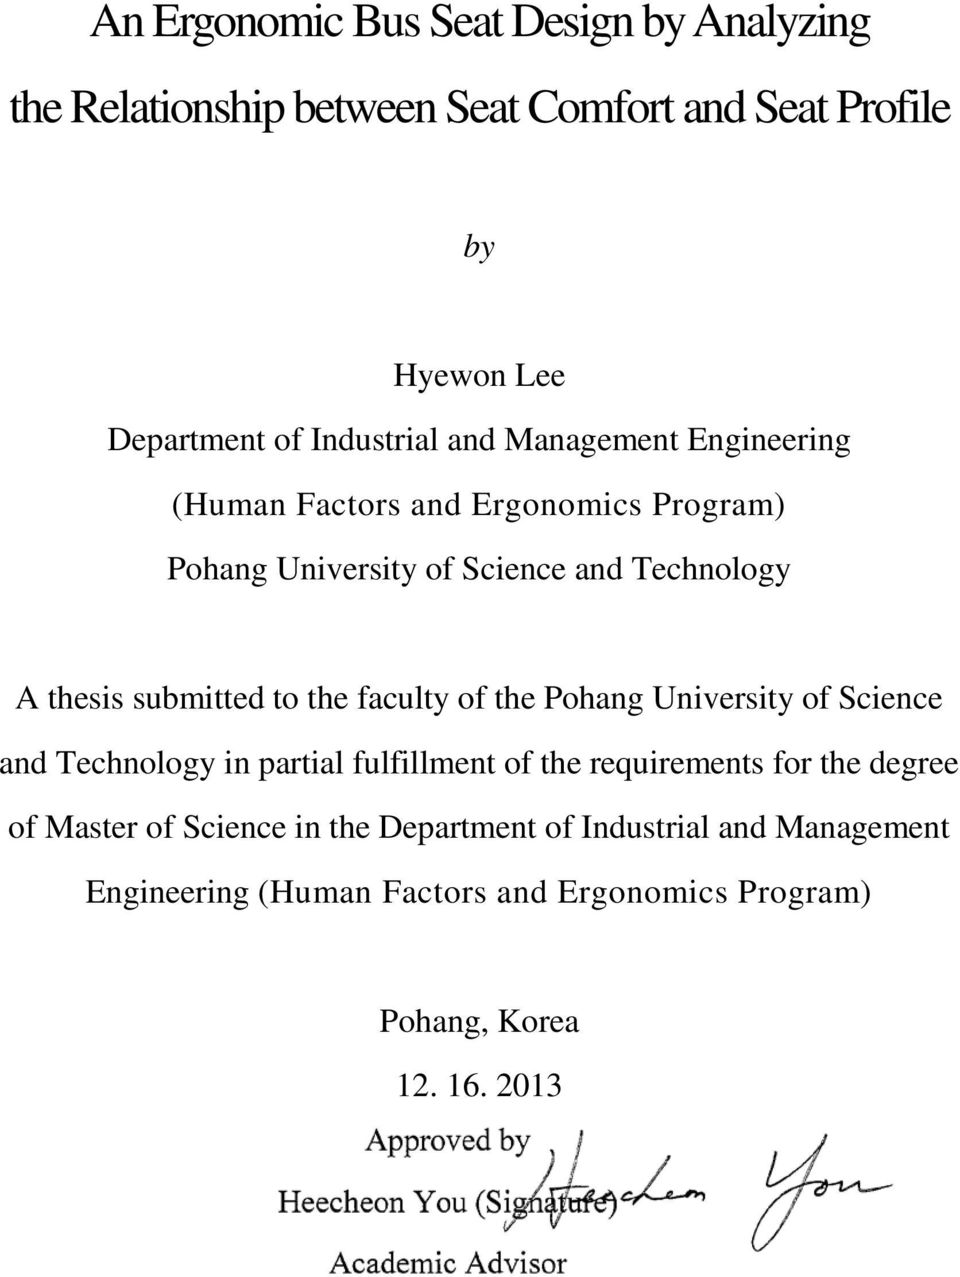 submitted to the faculty of the Pohang University of Science and Technology in partial fulfillment of the requirements for the degree